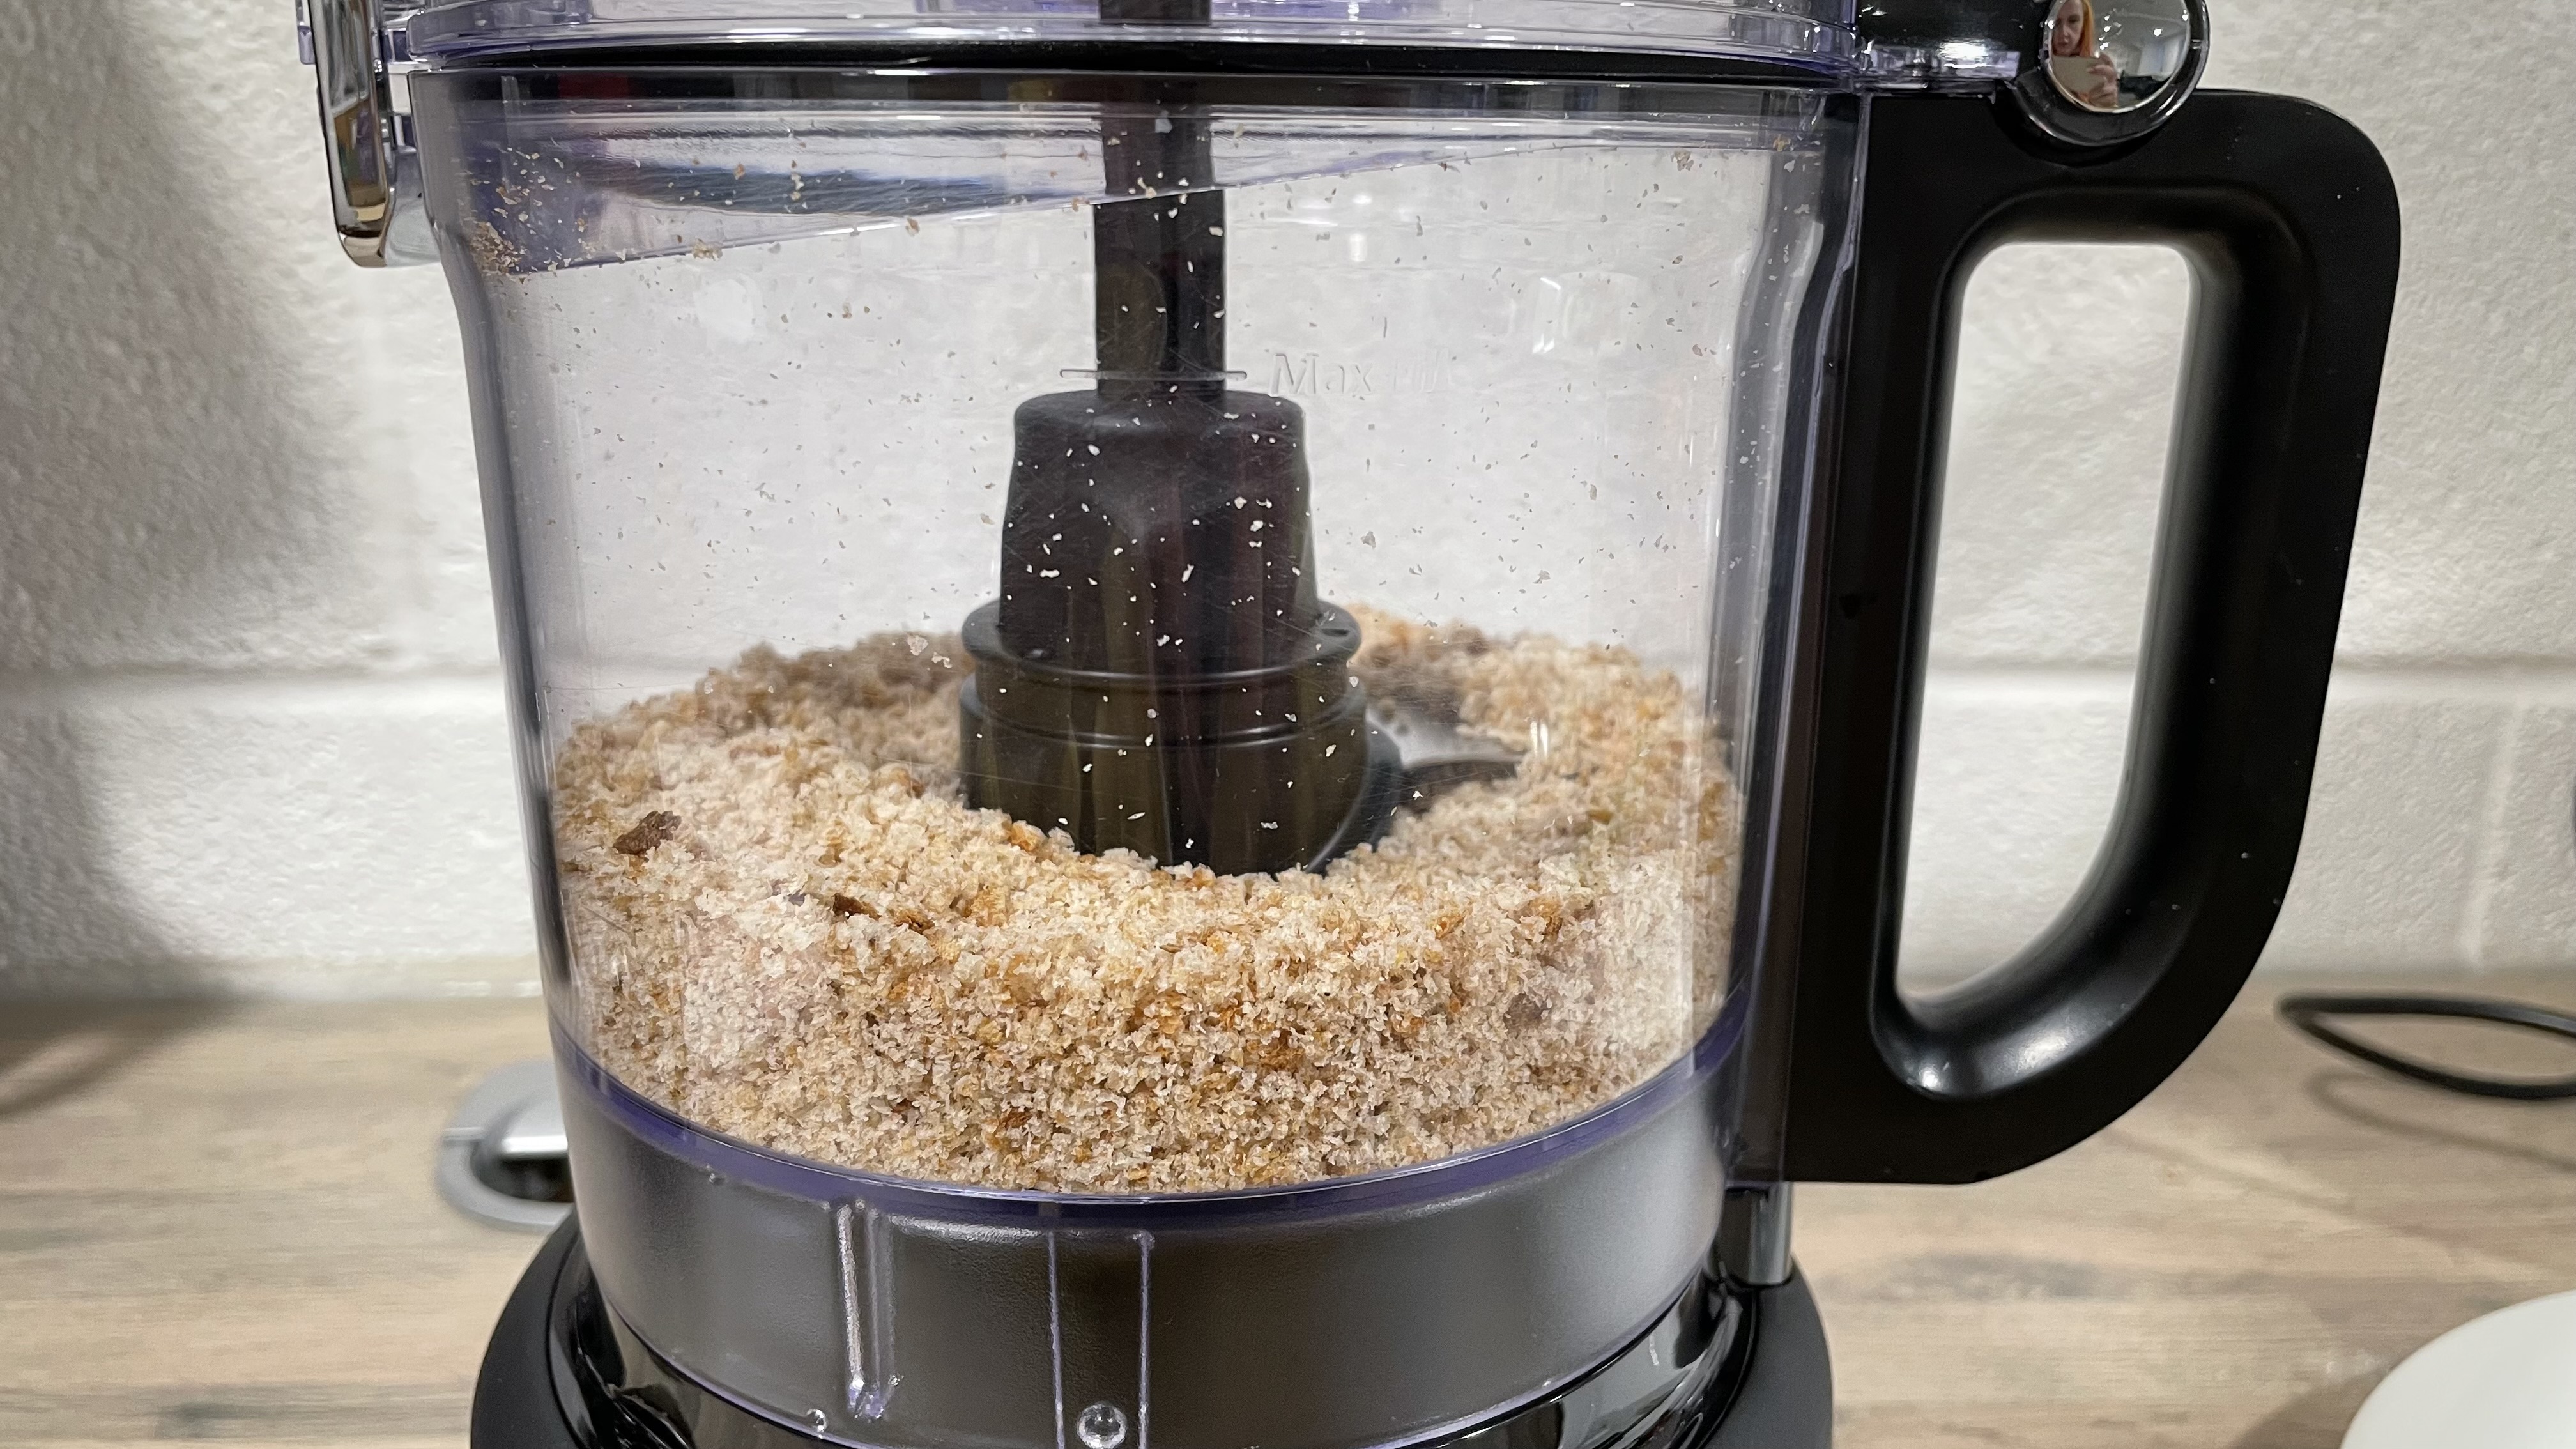 A closeup of the KitchenAid 7 cup food processor food bowl with breadcrumbs inside.